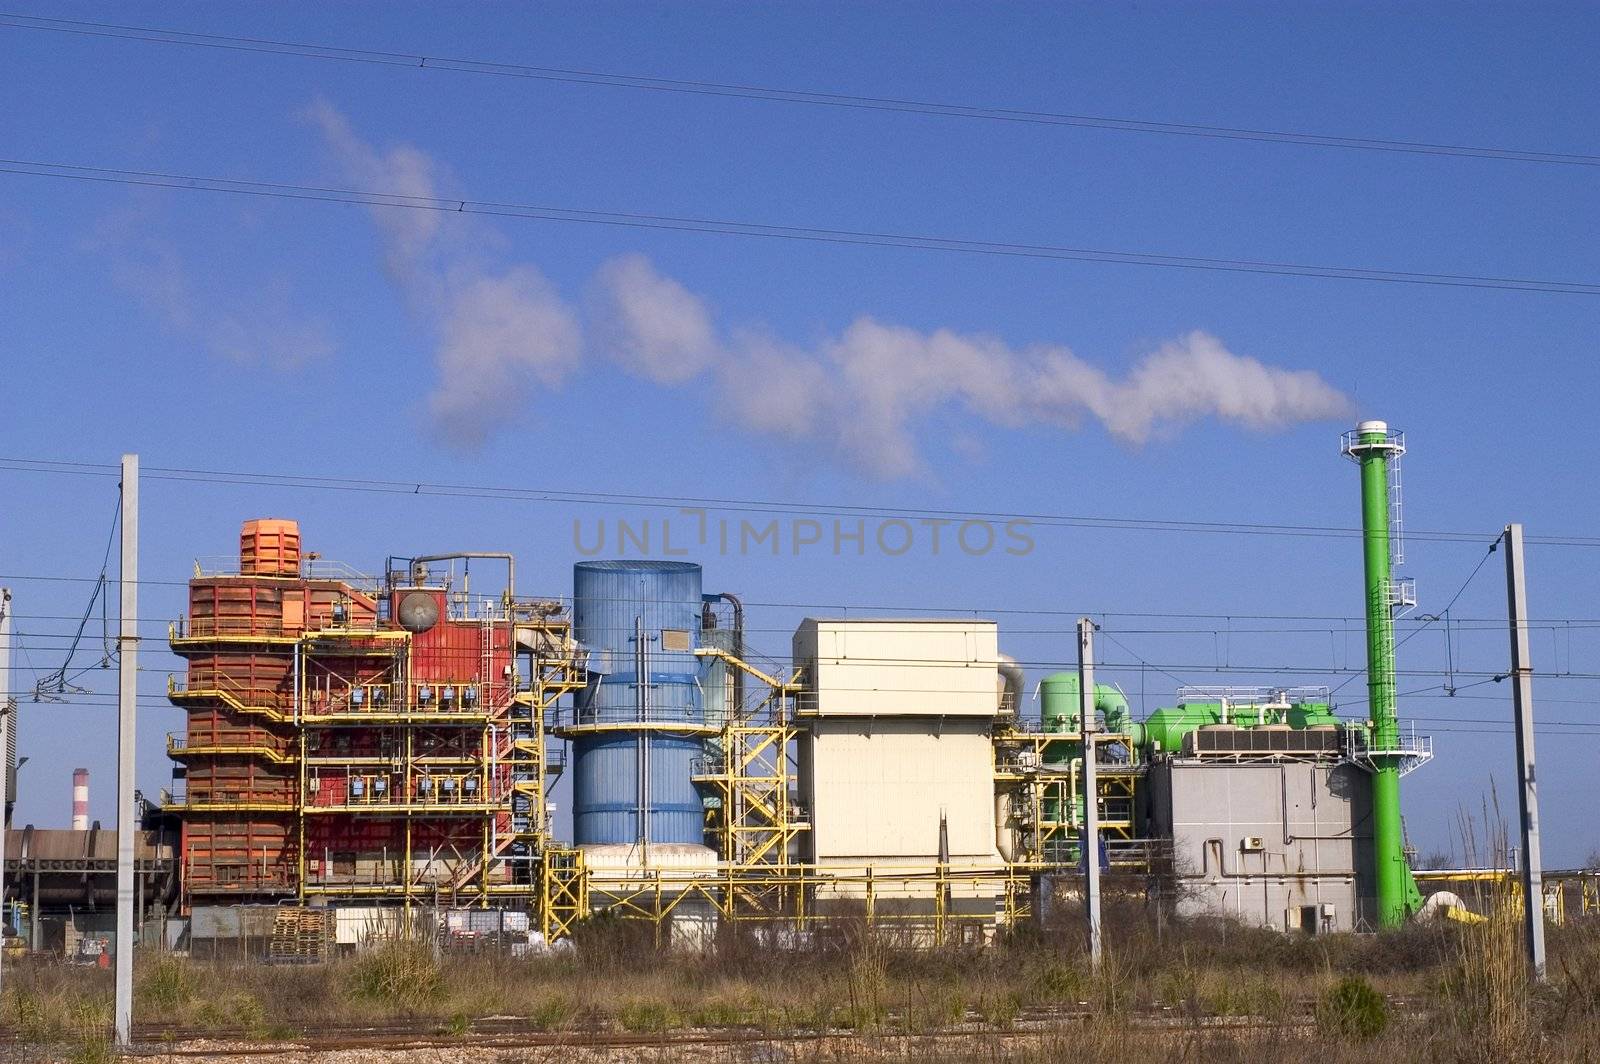 Petrochemical industry by gillespaire